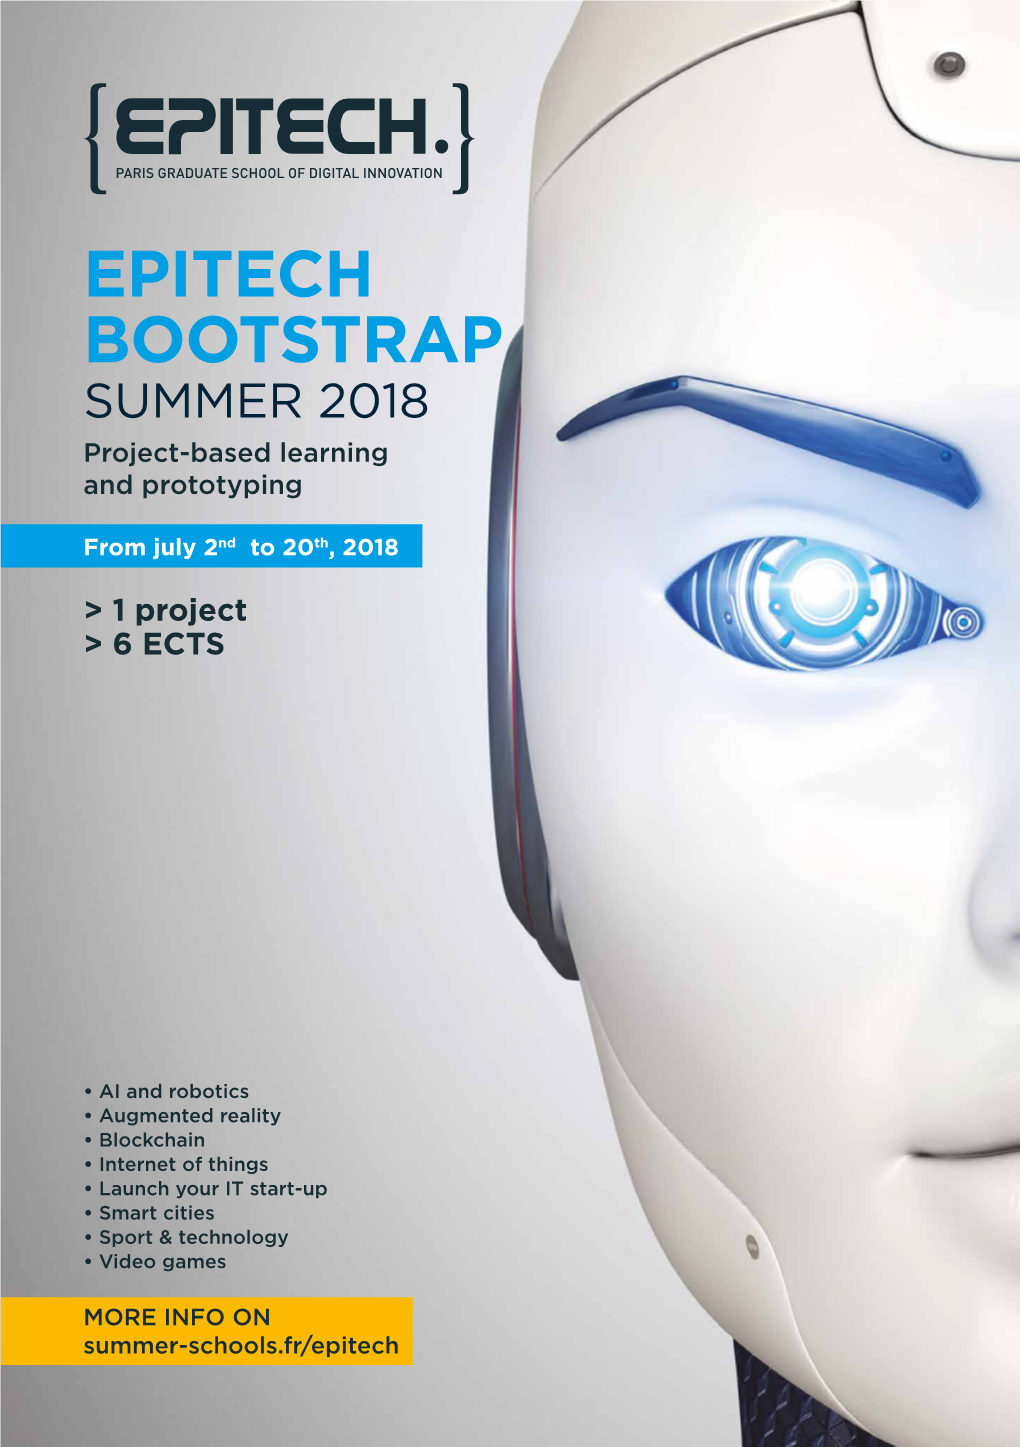 EPITECH BOOTSTRAP SUMMER 2018 Project-Based Learning and Prototyping